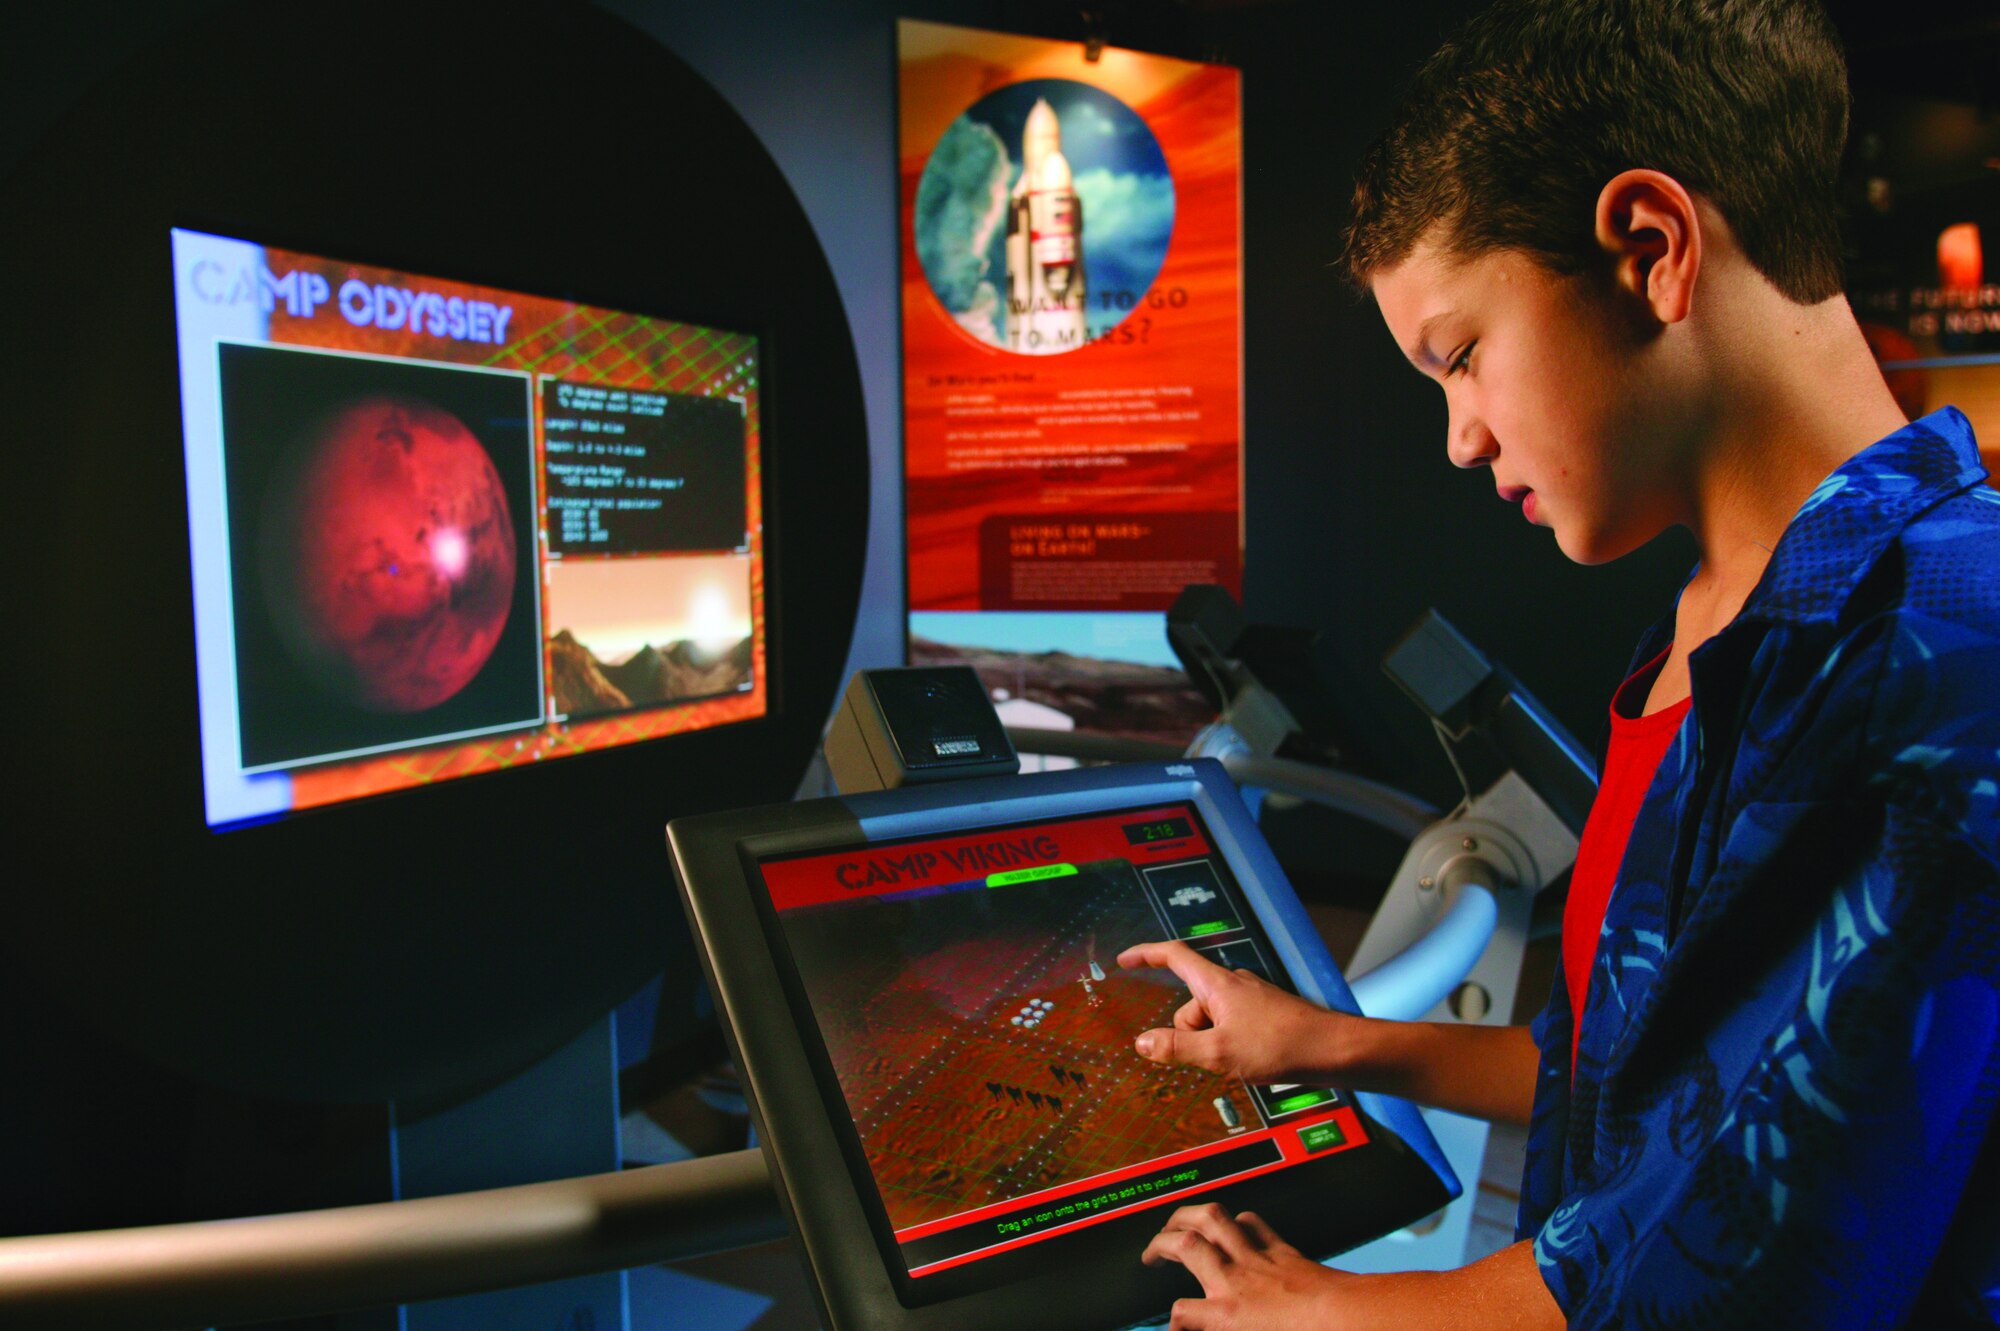 Picture of a person experiencing the SPACE exhibit